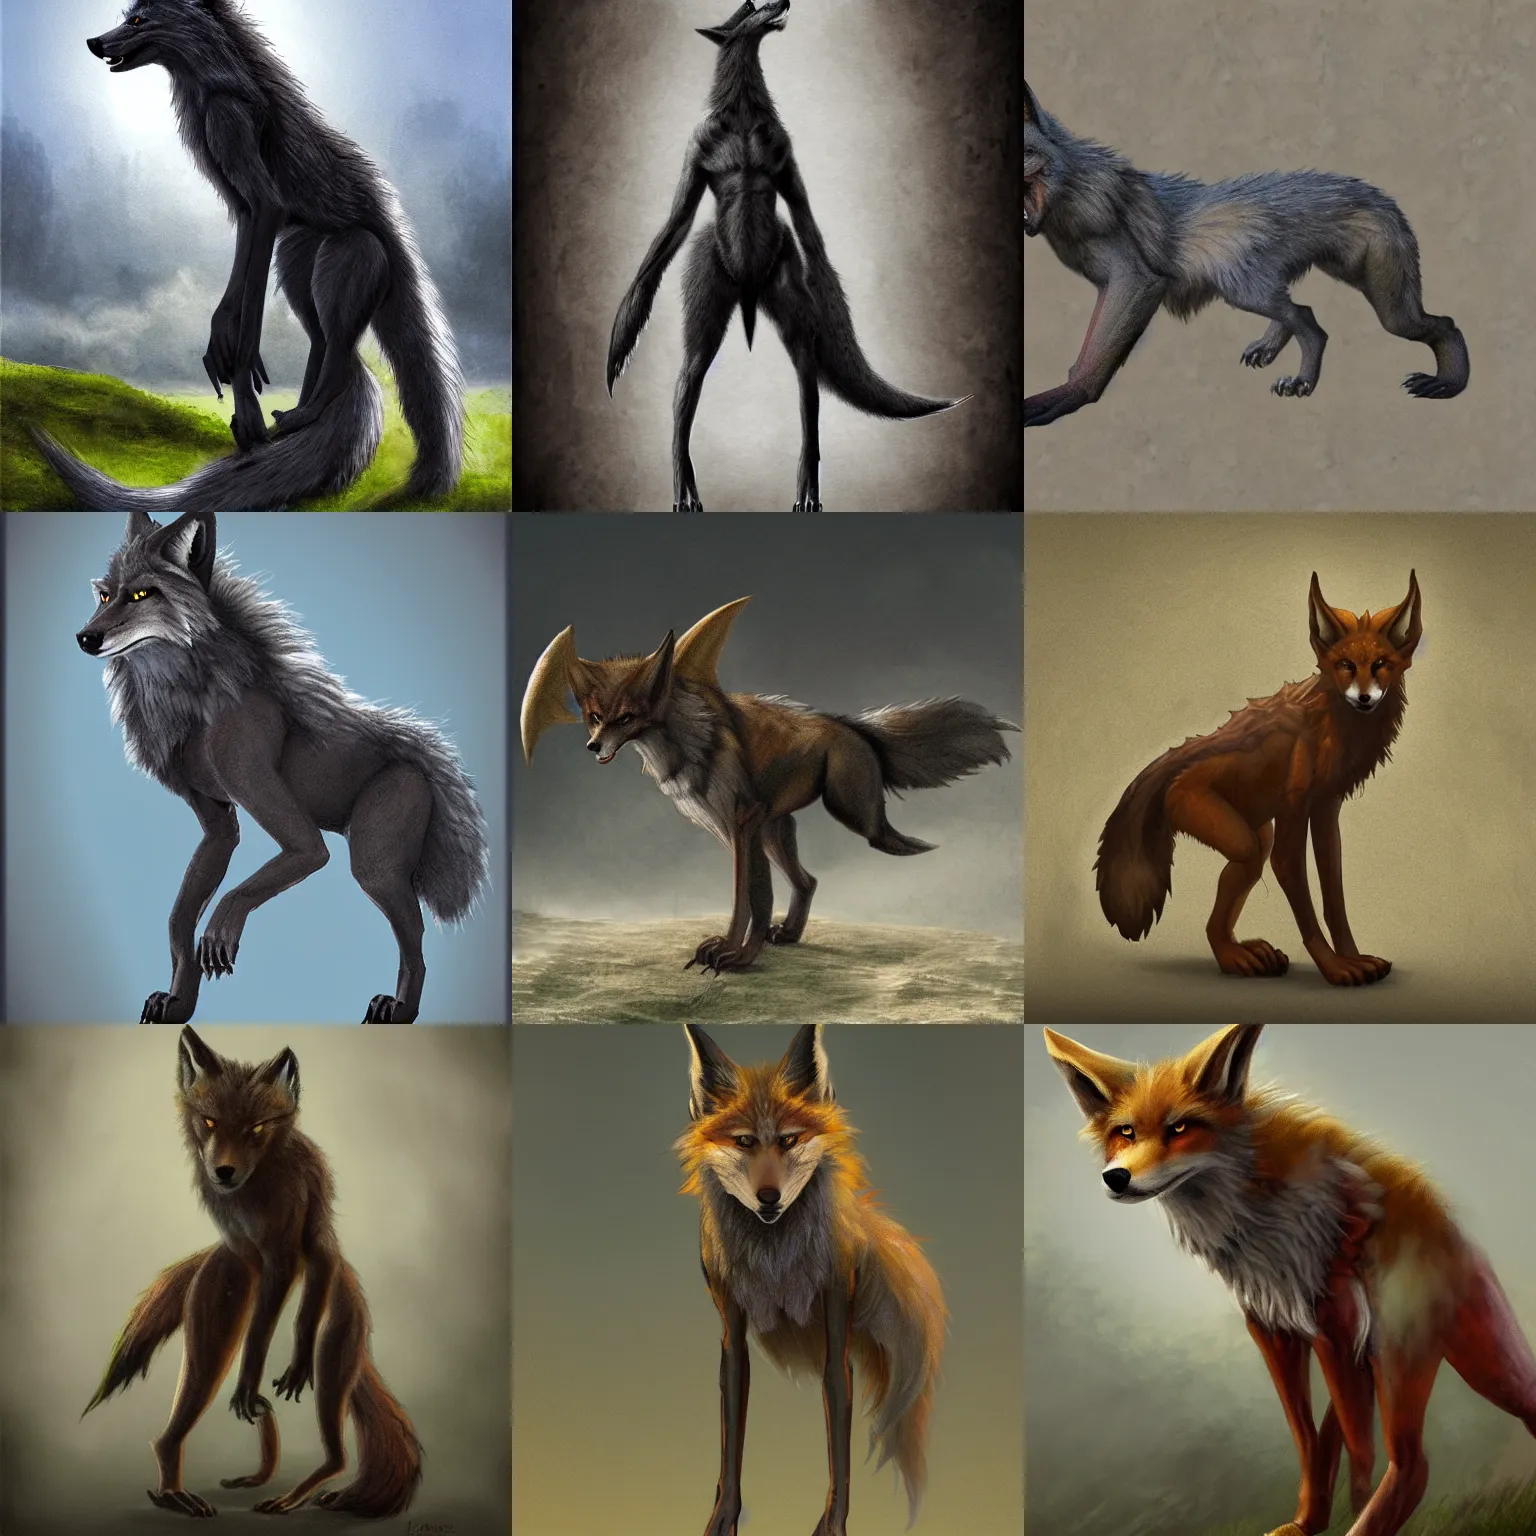 Prompt: fantasy art of a werefox standing on two legs, photorealistic